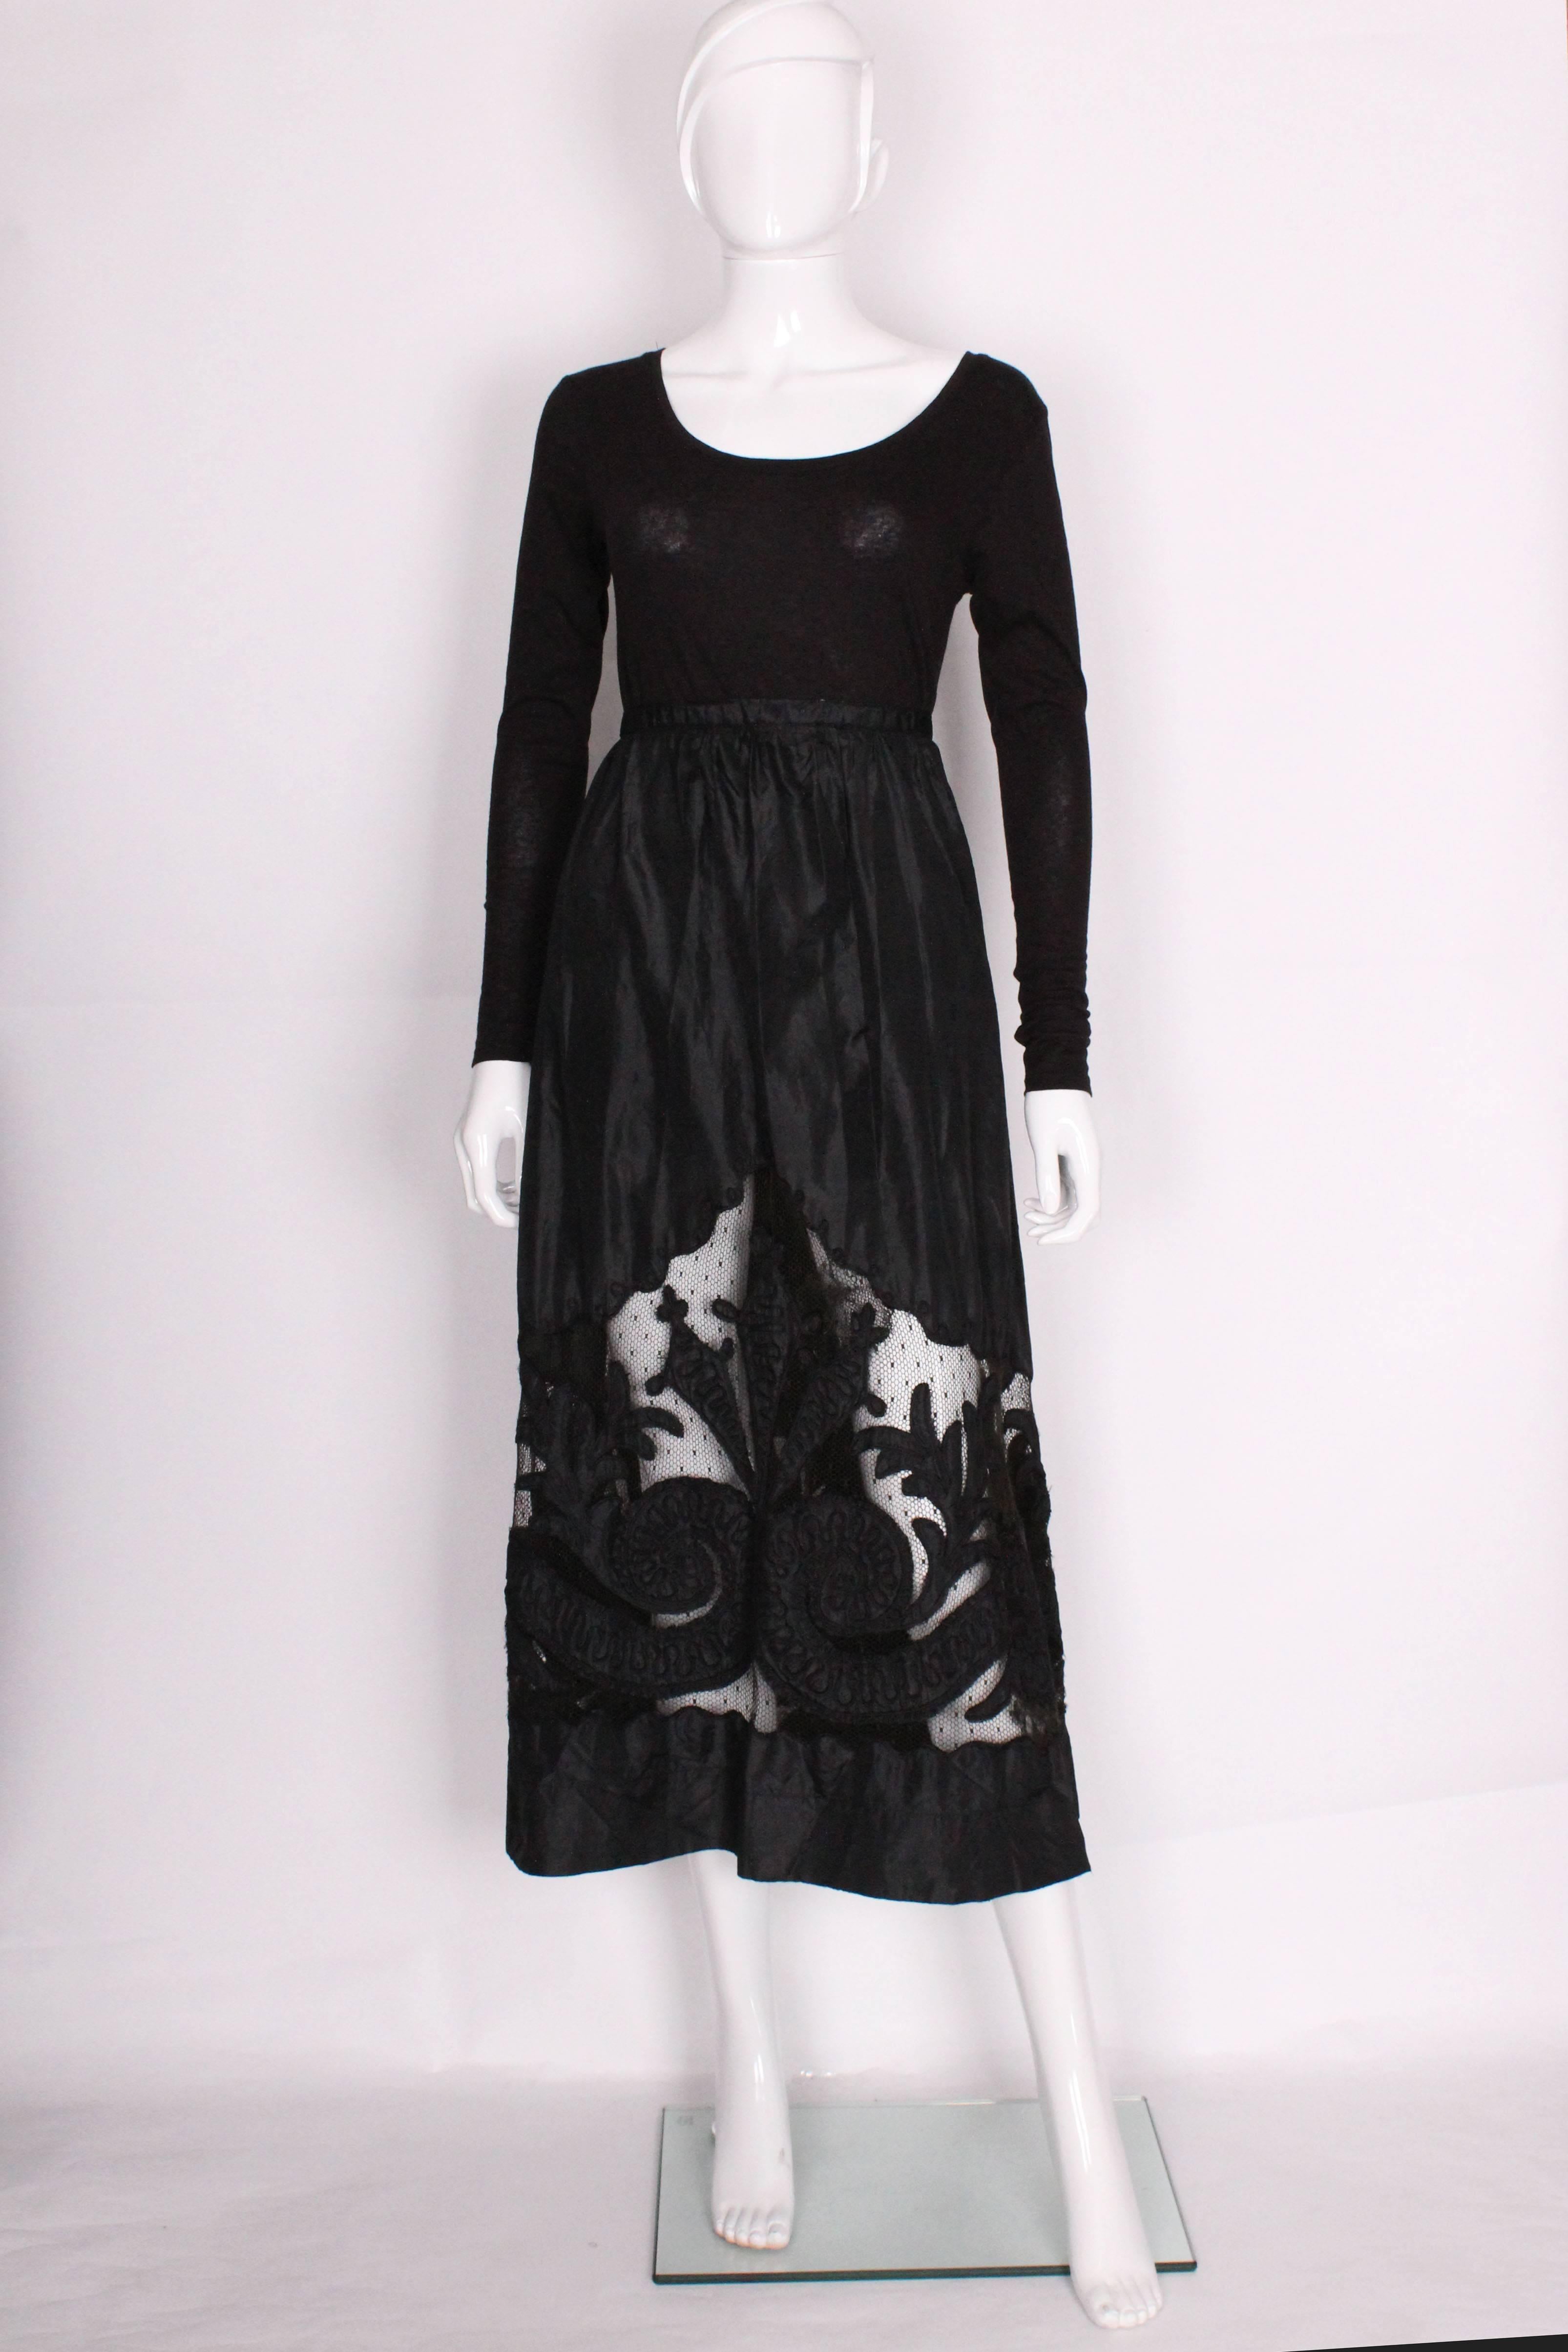 This is a really beautiful, black skirt from the Edwardian era. It's made of a heavy silk that has a slight shine to it and has a large cut out panel at the bottom that is filled in with netting. On top of the netting there are decorative panels of